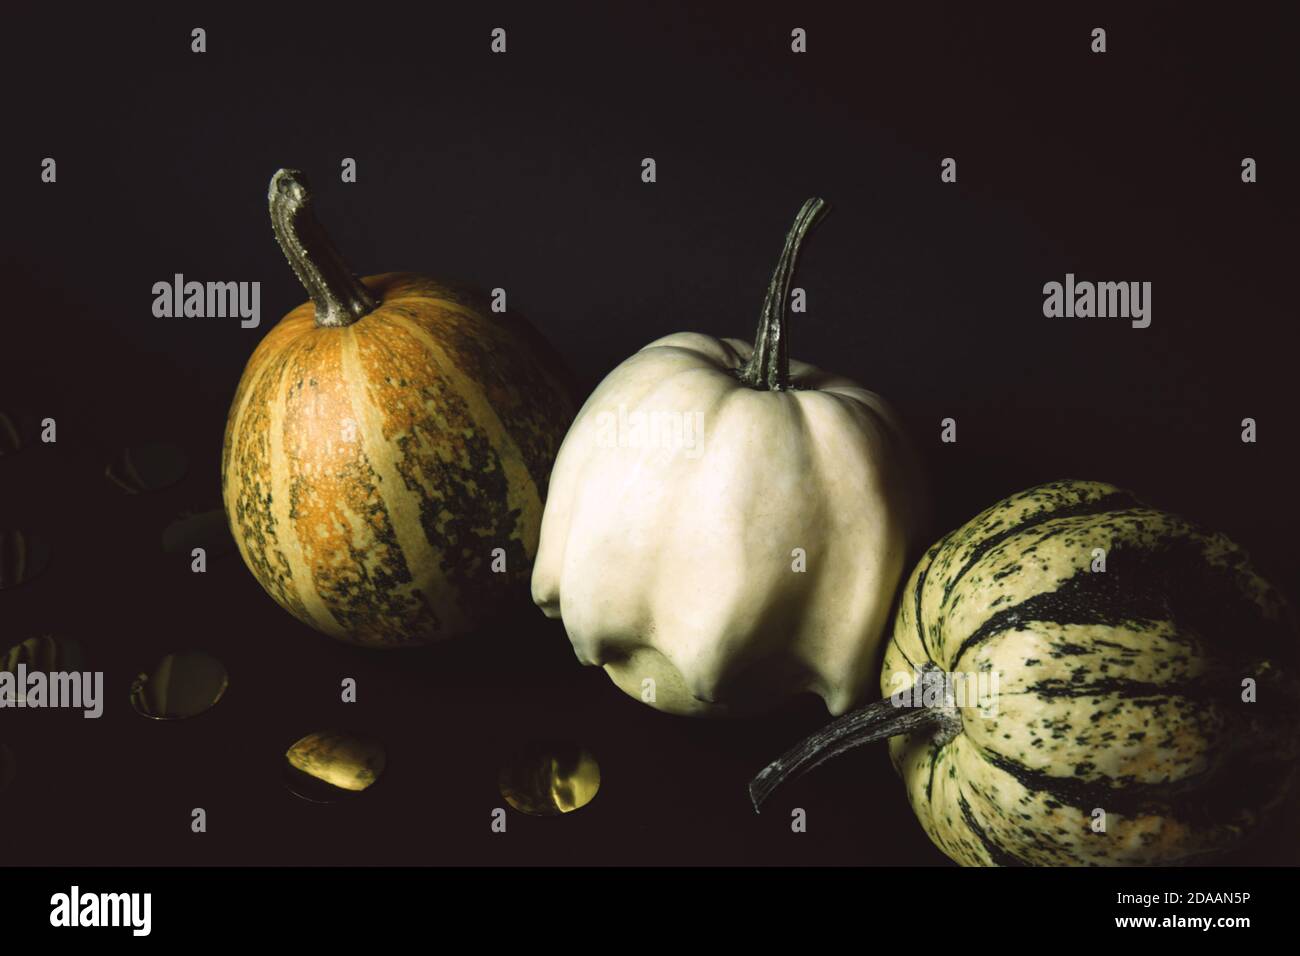 Three pumpkins and decor from paper gold confetti isolated on a black background. It's Halloween time. Halloween mood. Minimal creative stillife Stock Photo